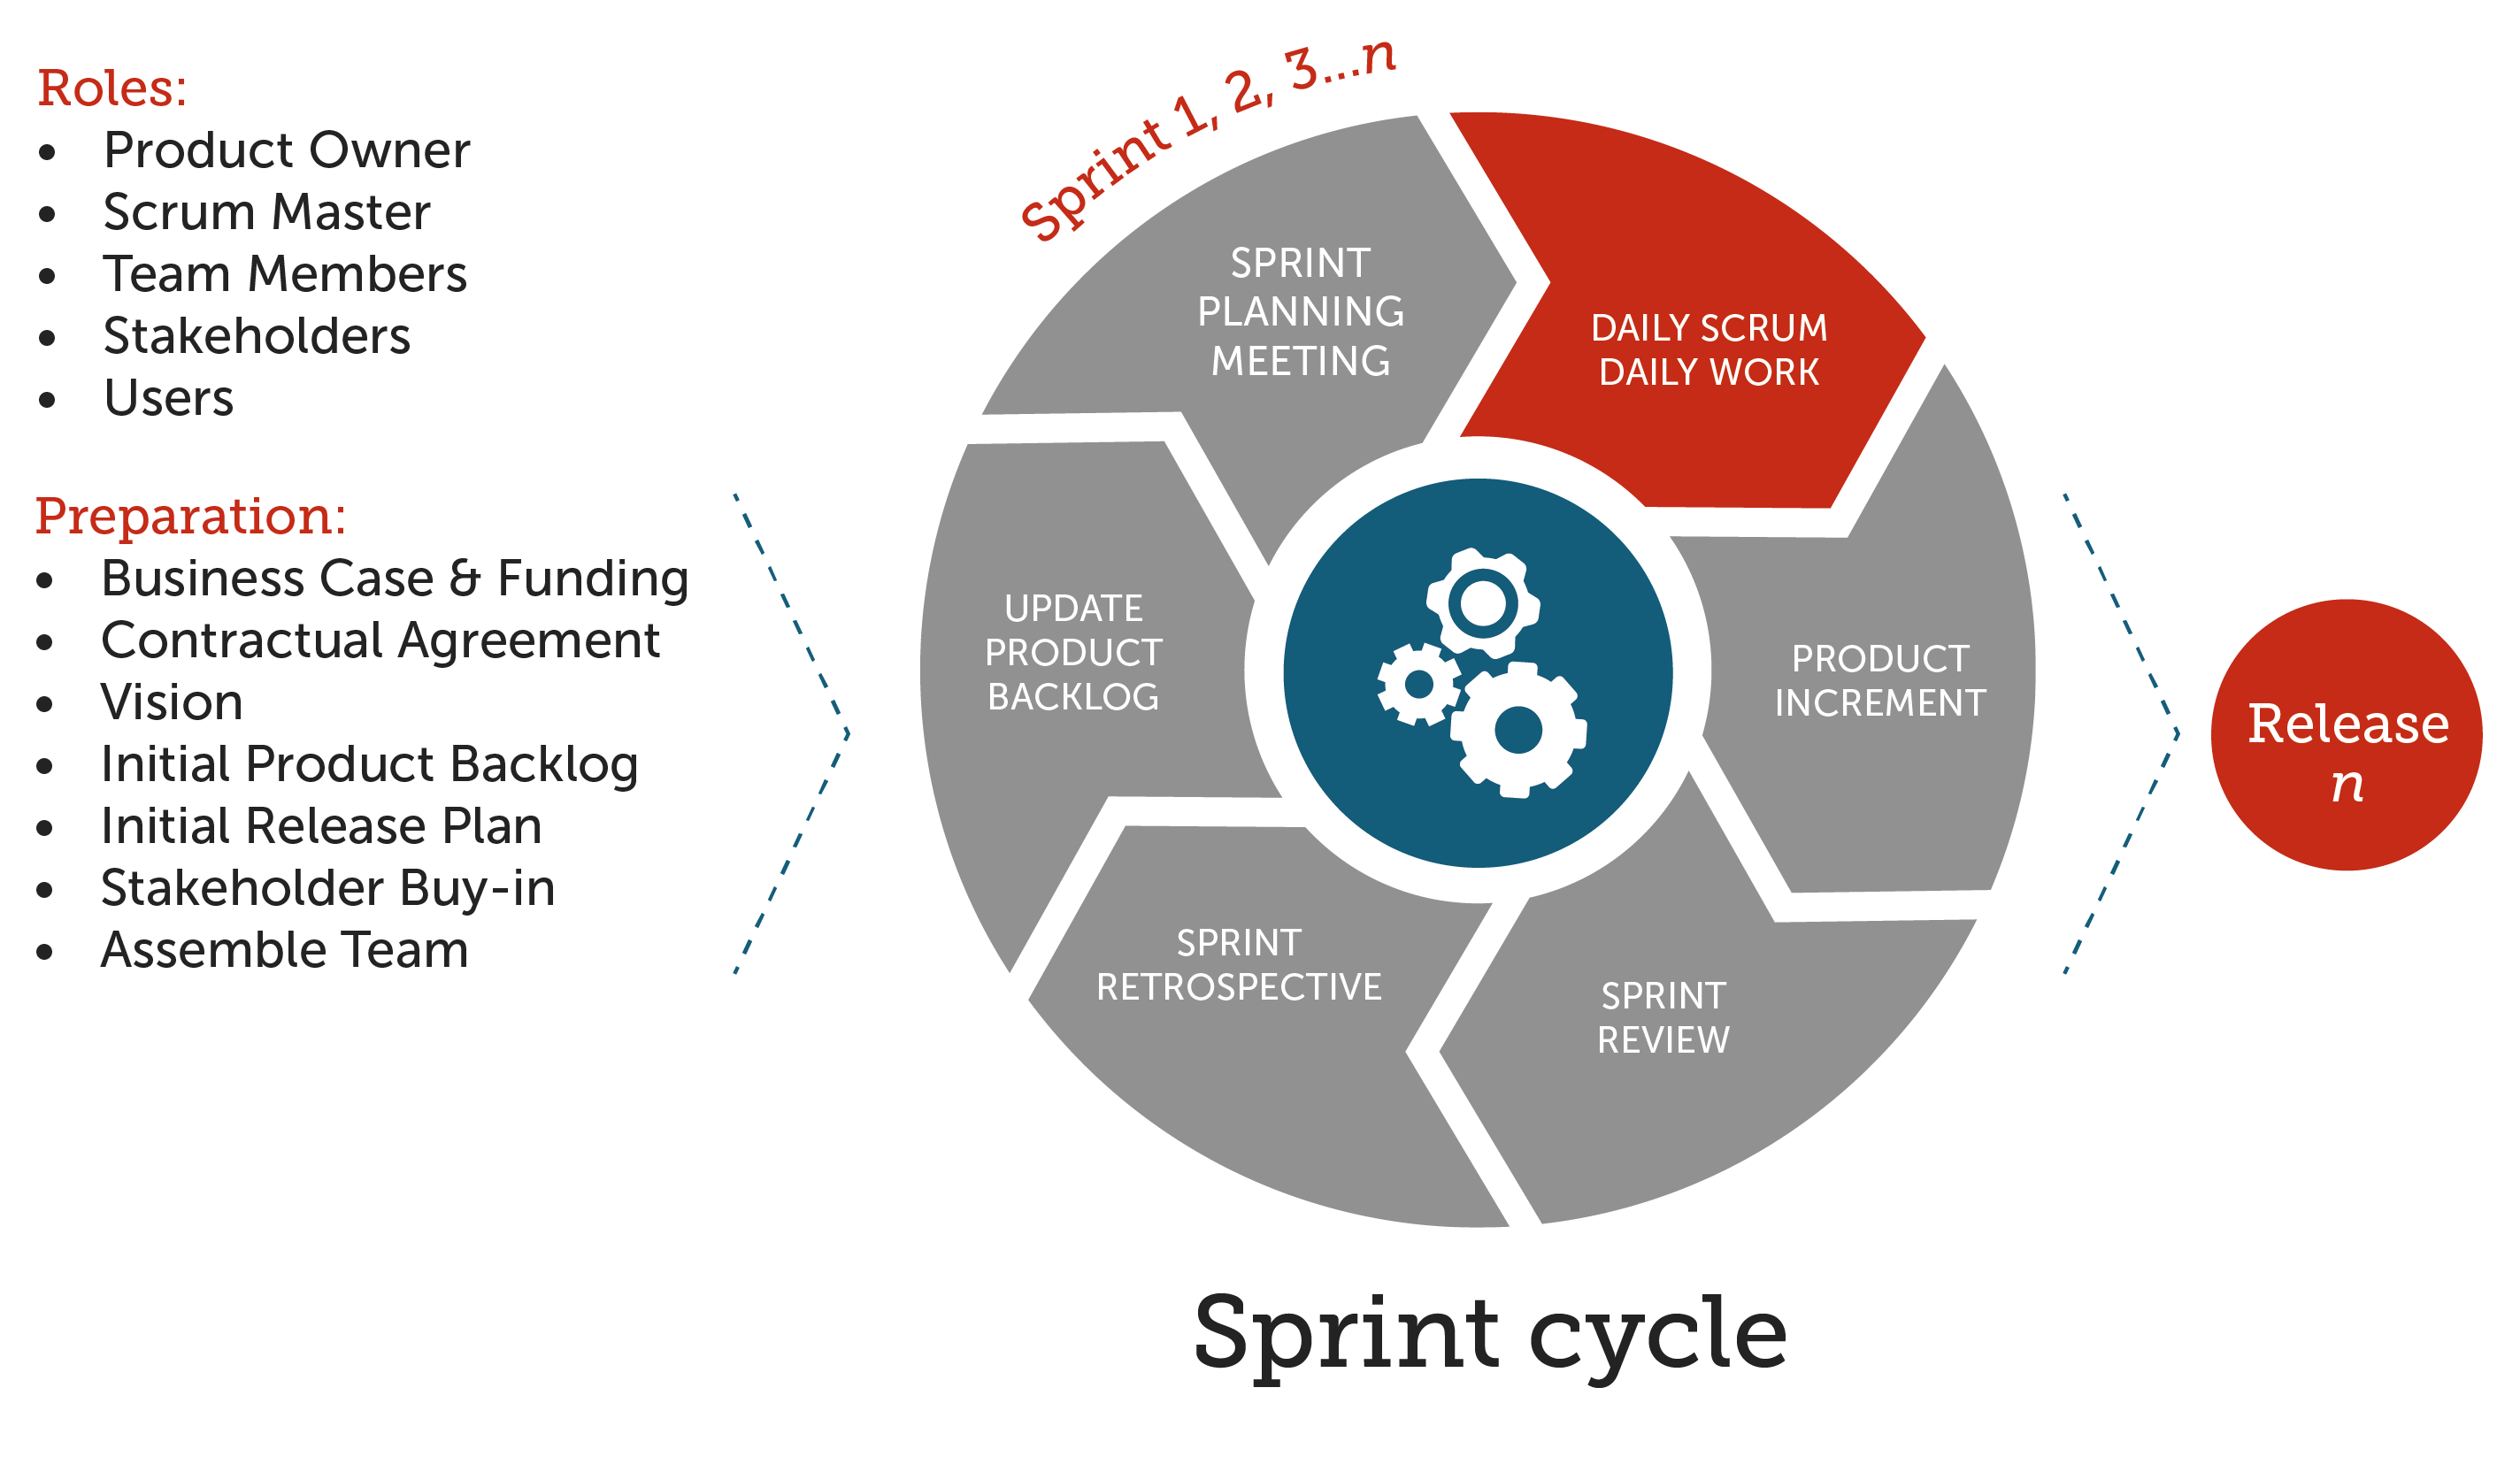 res/agile-scrum-sprint-cycle.png